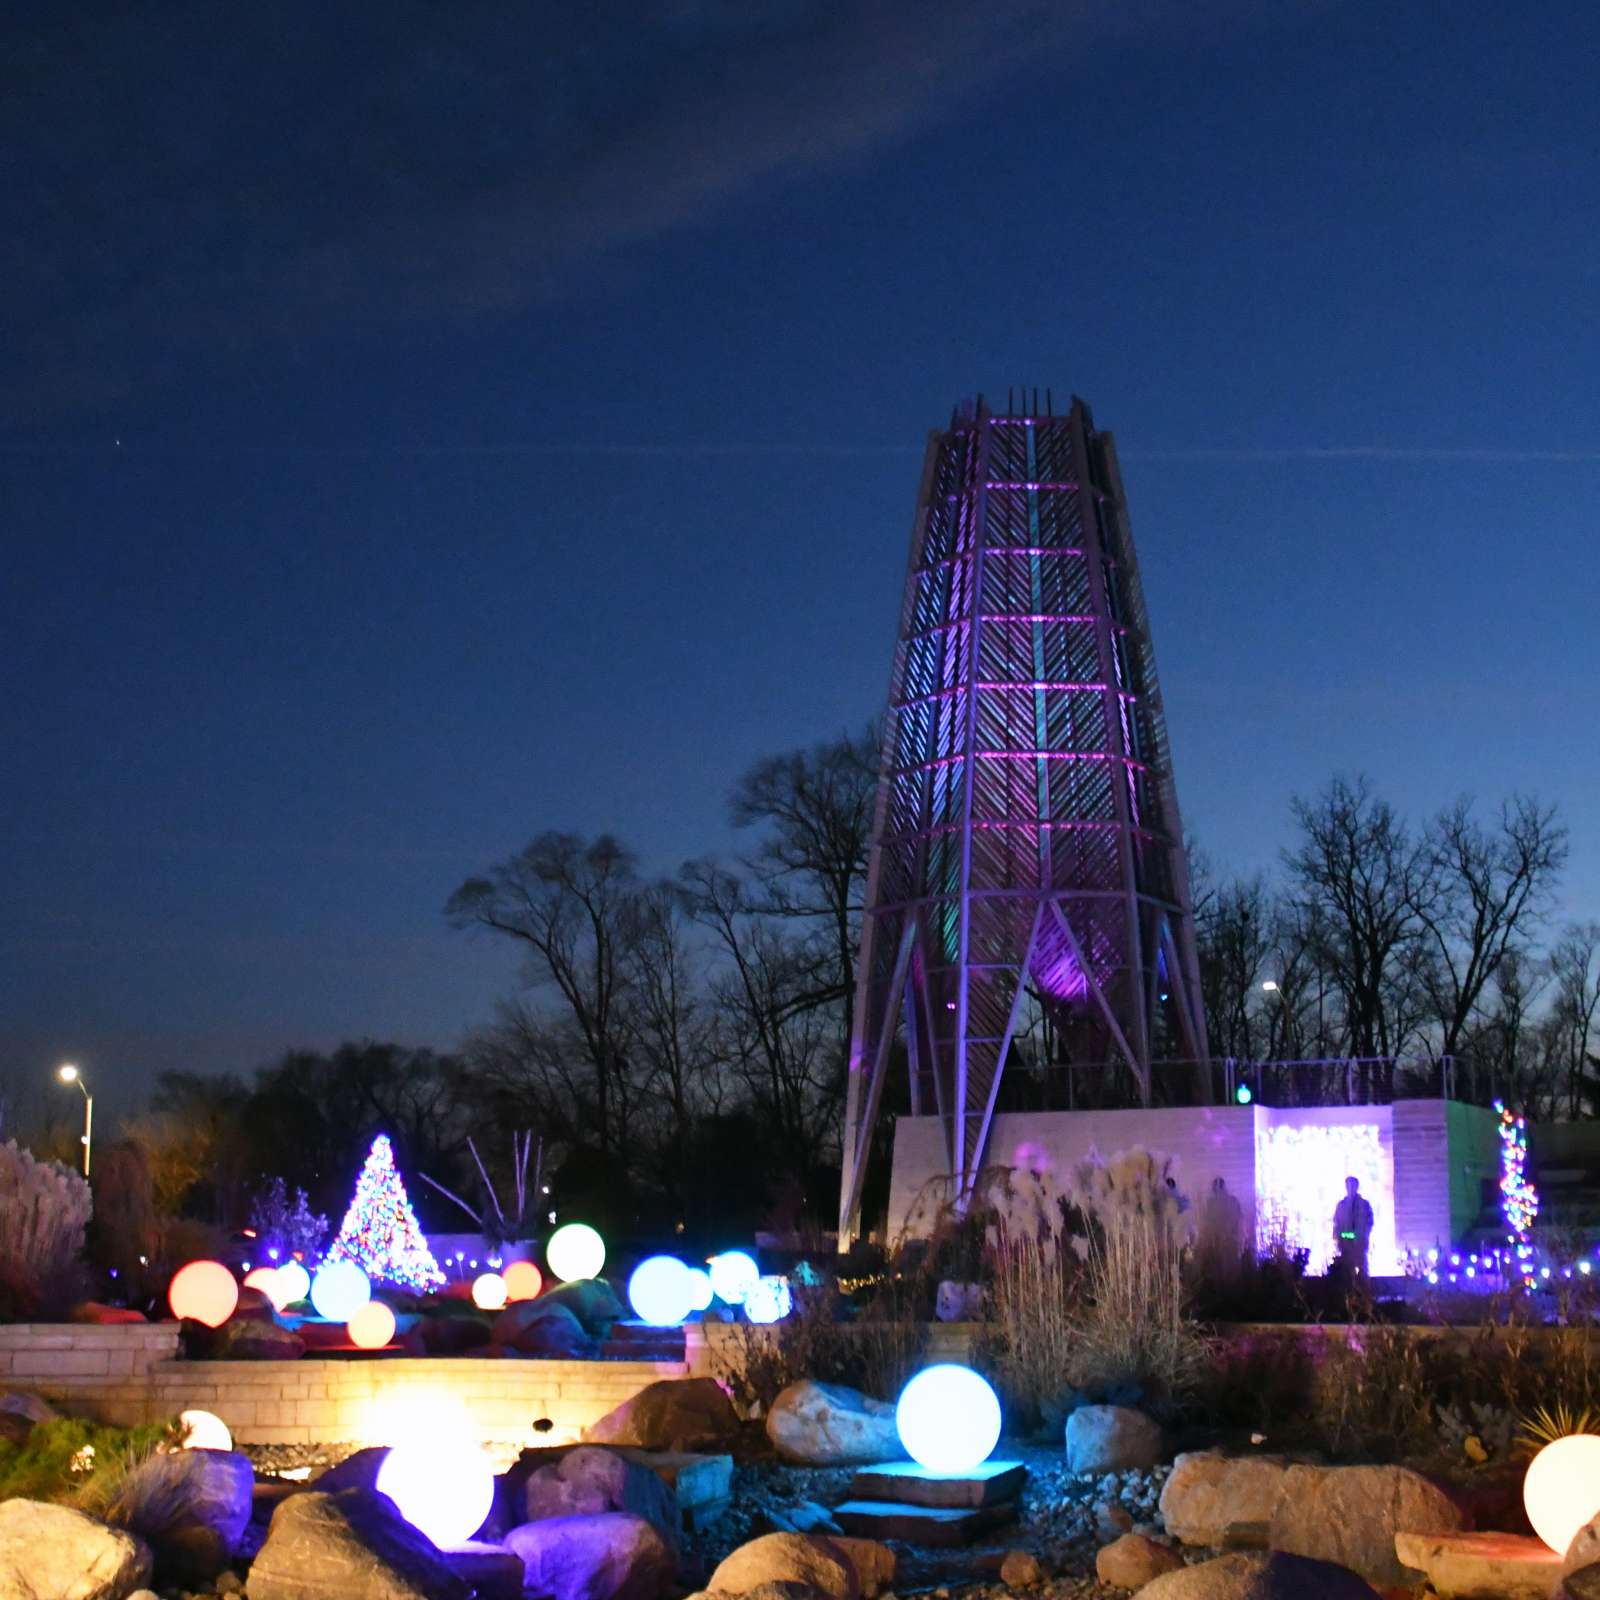 The tower of Sycamore Falls stands tall with lit orbs and shining strands lighting up the night.